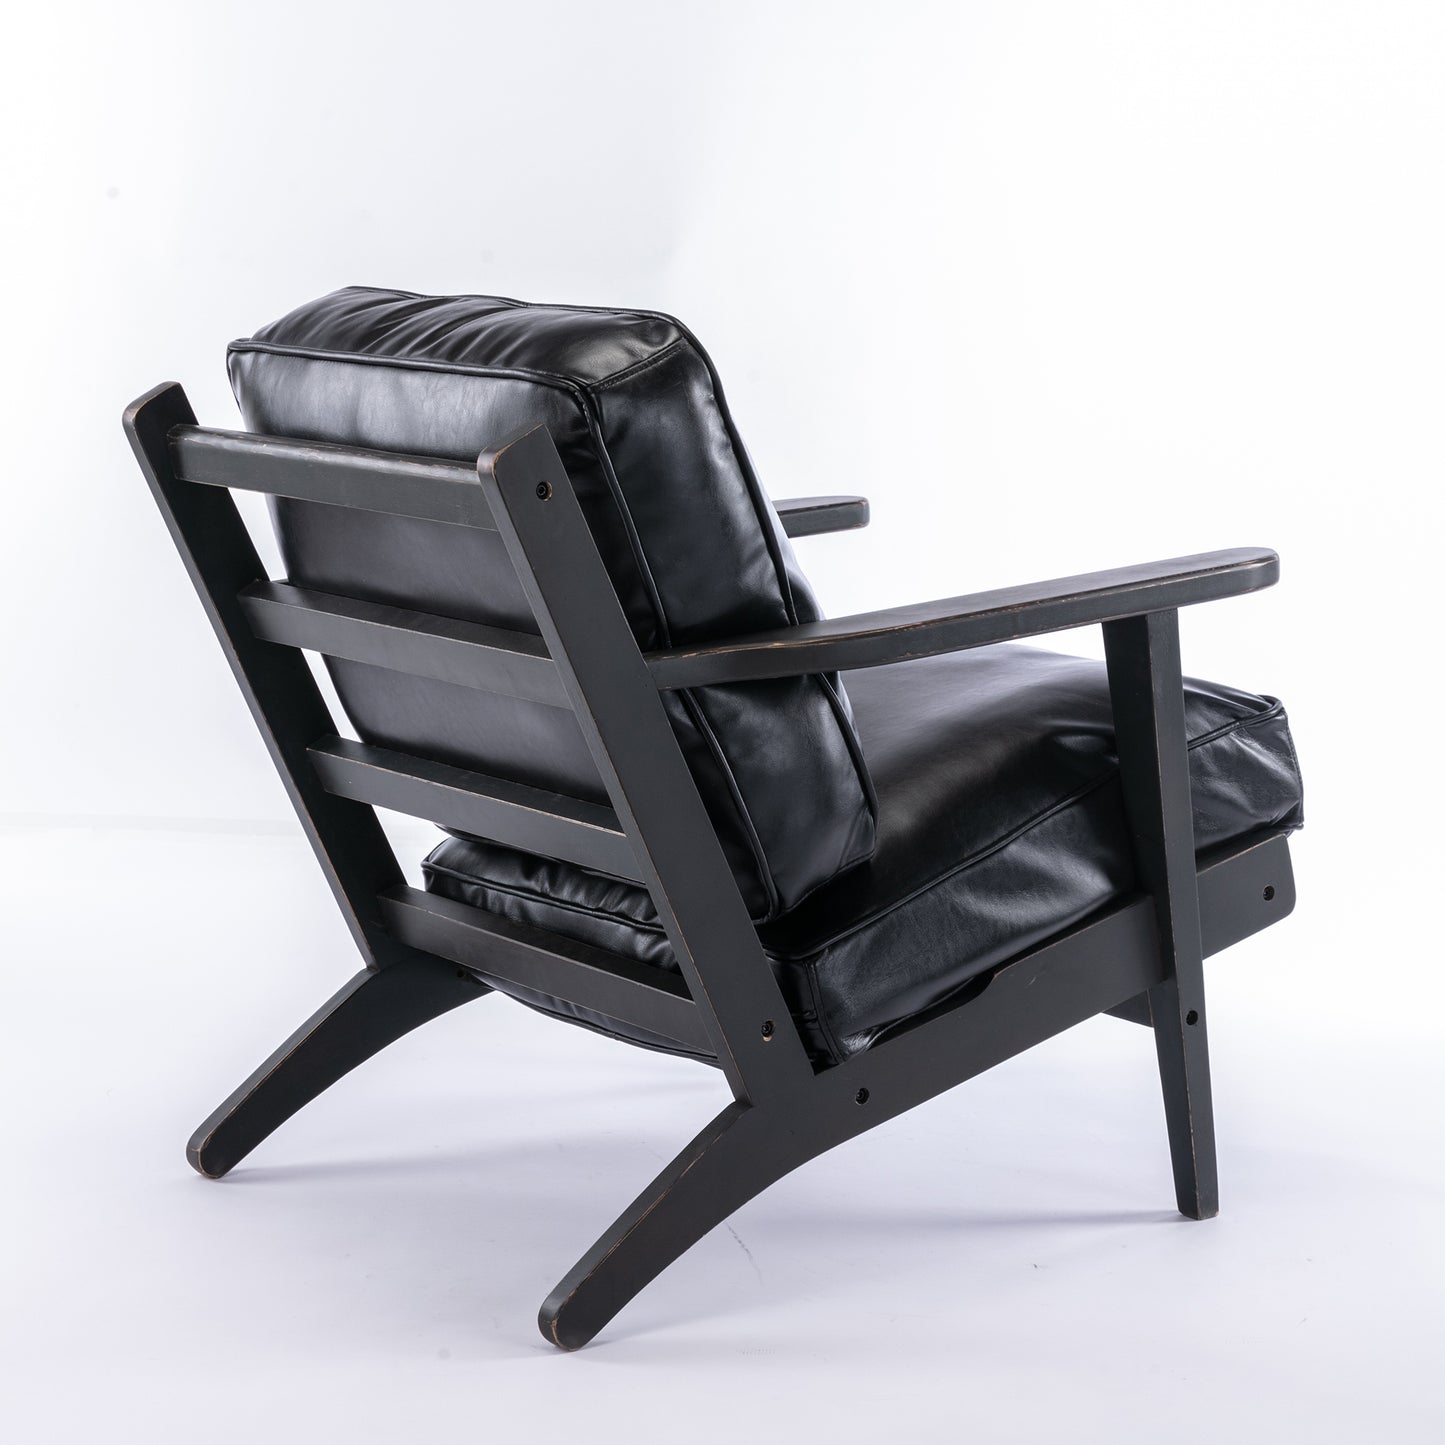 Solid Ash Wood wood  black antique painting removable cushion arm chair, mid-century sustainable PU leather accent chair